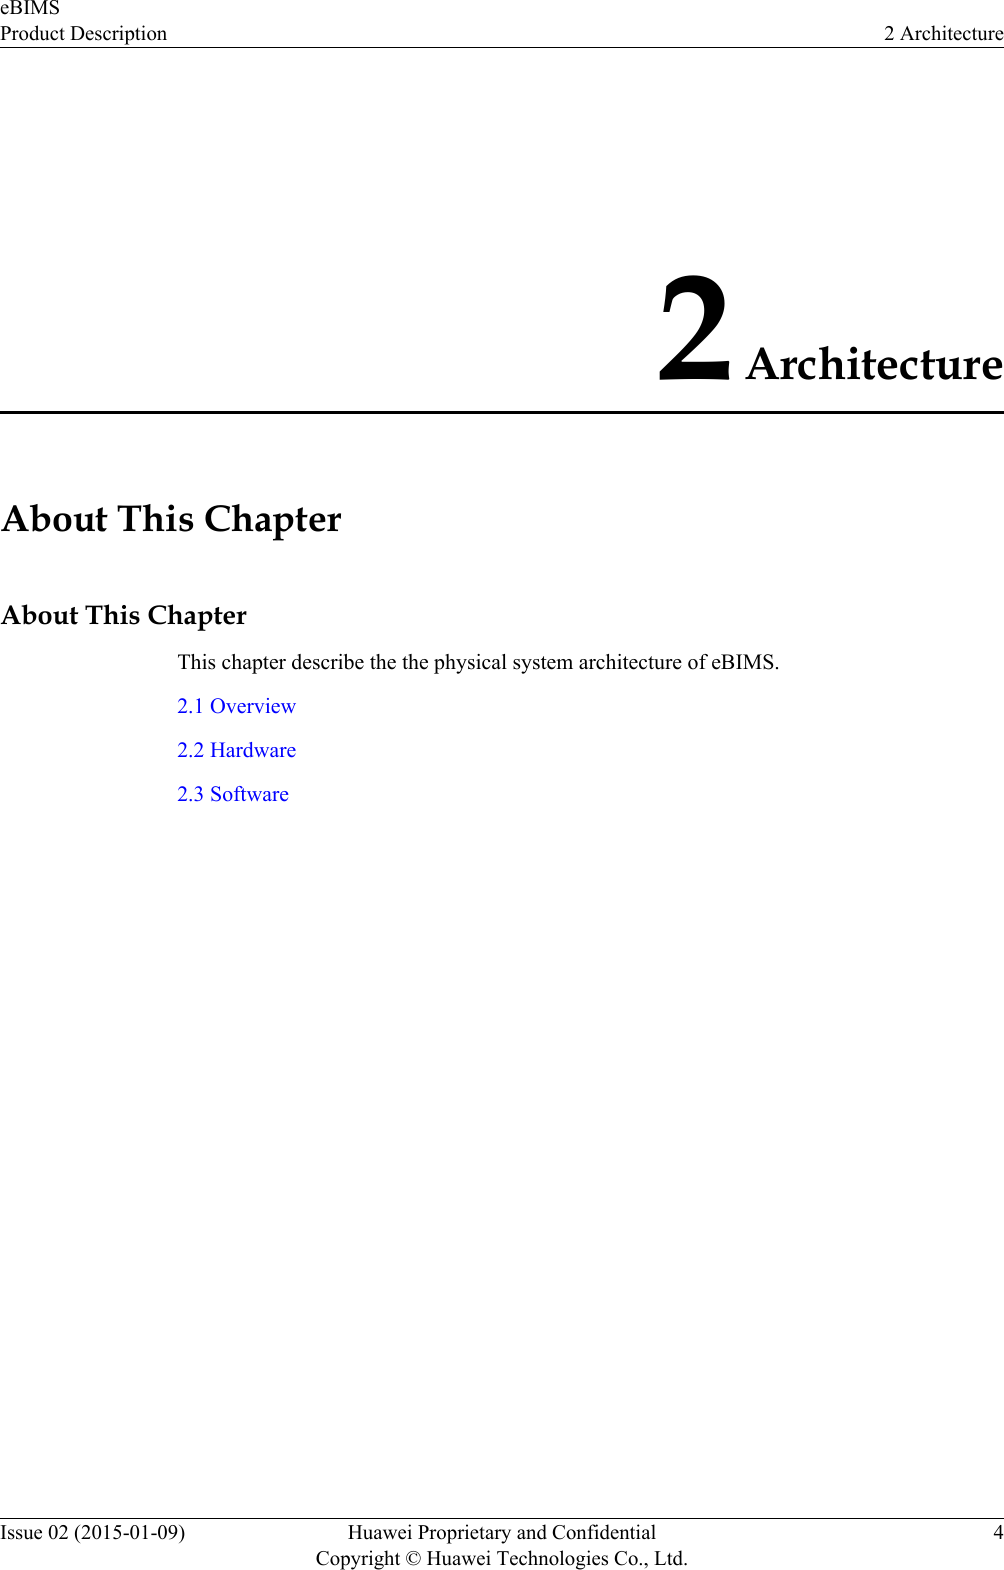 2 ArchitectureAbout This ChapterAbout This ChapterThis chapter describe the the physical system architecture of eBIMS.2.1 Overview2.2 Hardware2.3 SoftwareeBIMSProduct Description 2 ArchitectureIssue 02 (2015-01-09) Huawei Proprietary and ConfidentialCopyright © Huawei Technologies Co., Ltd.4